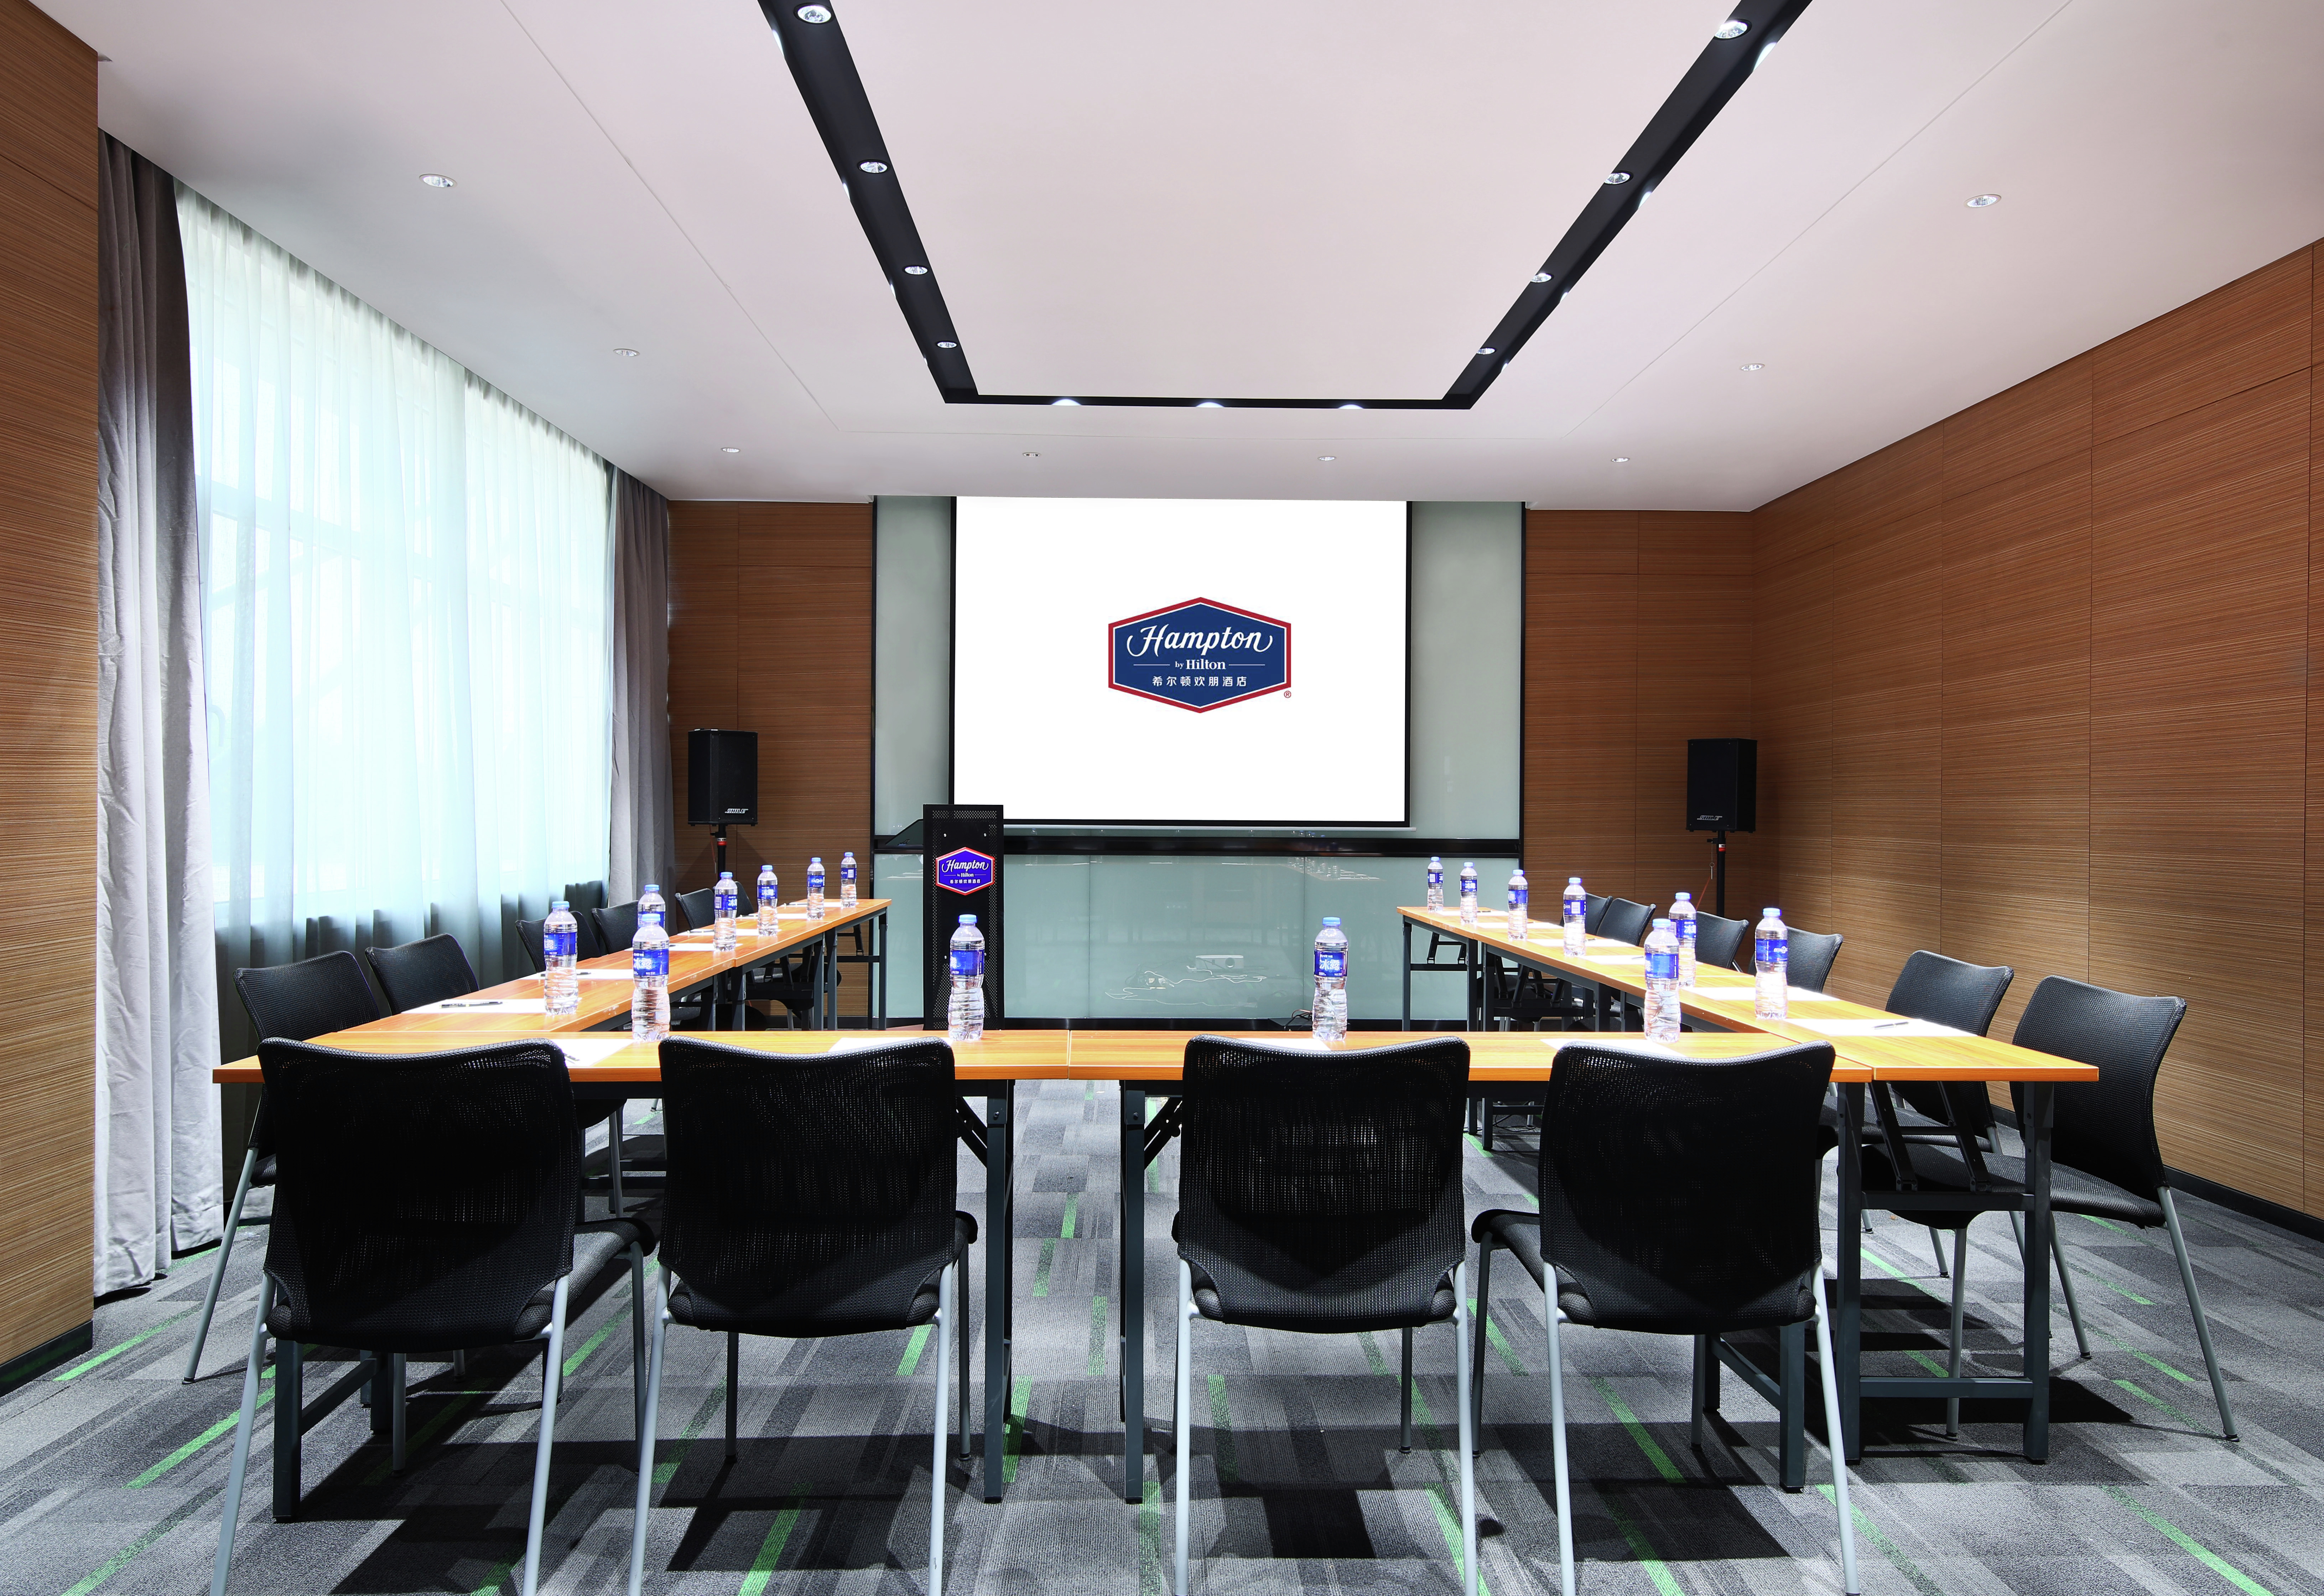 Meeting Room with Projector Screen, Floorstanding Speakers, and Table and Chairs in U-Shaped Setup